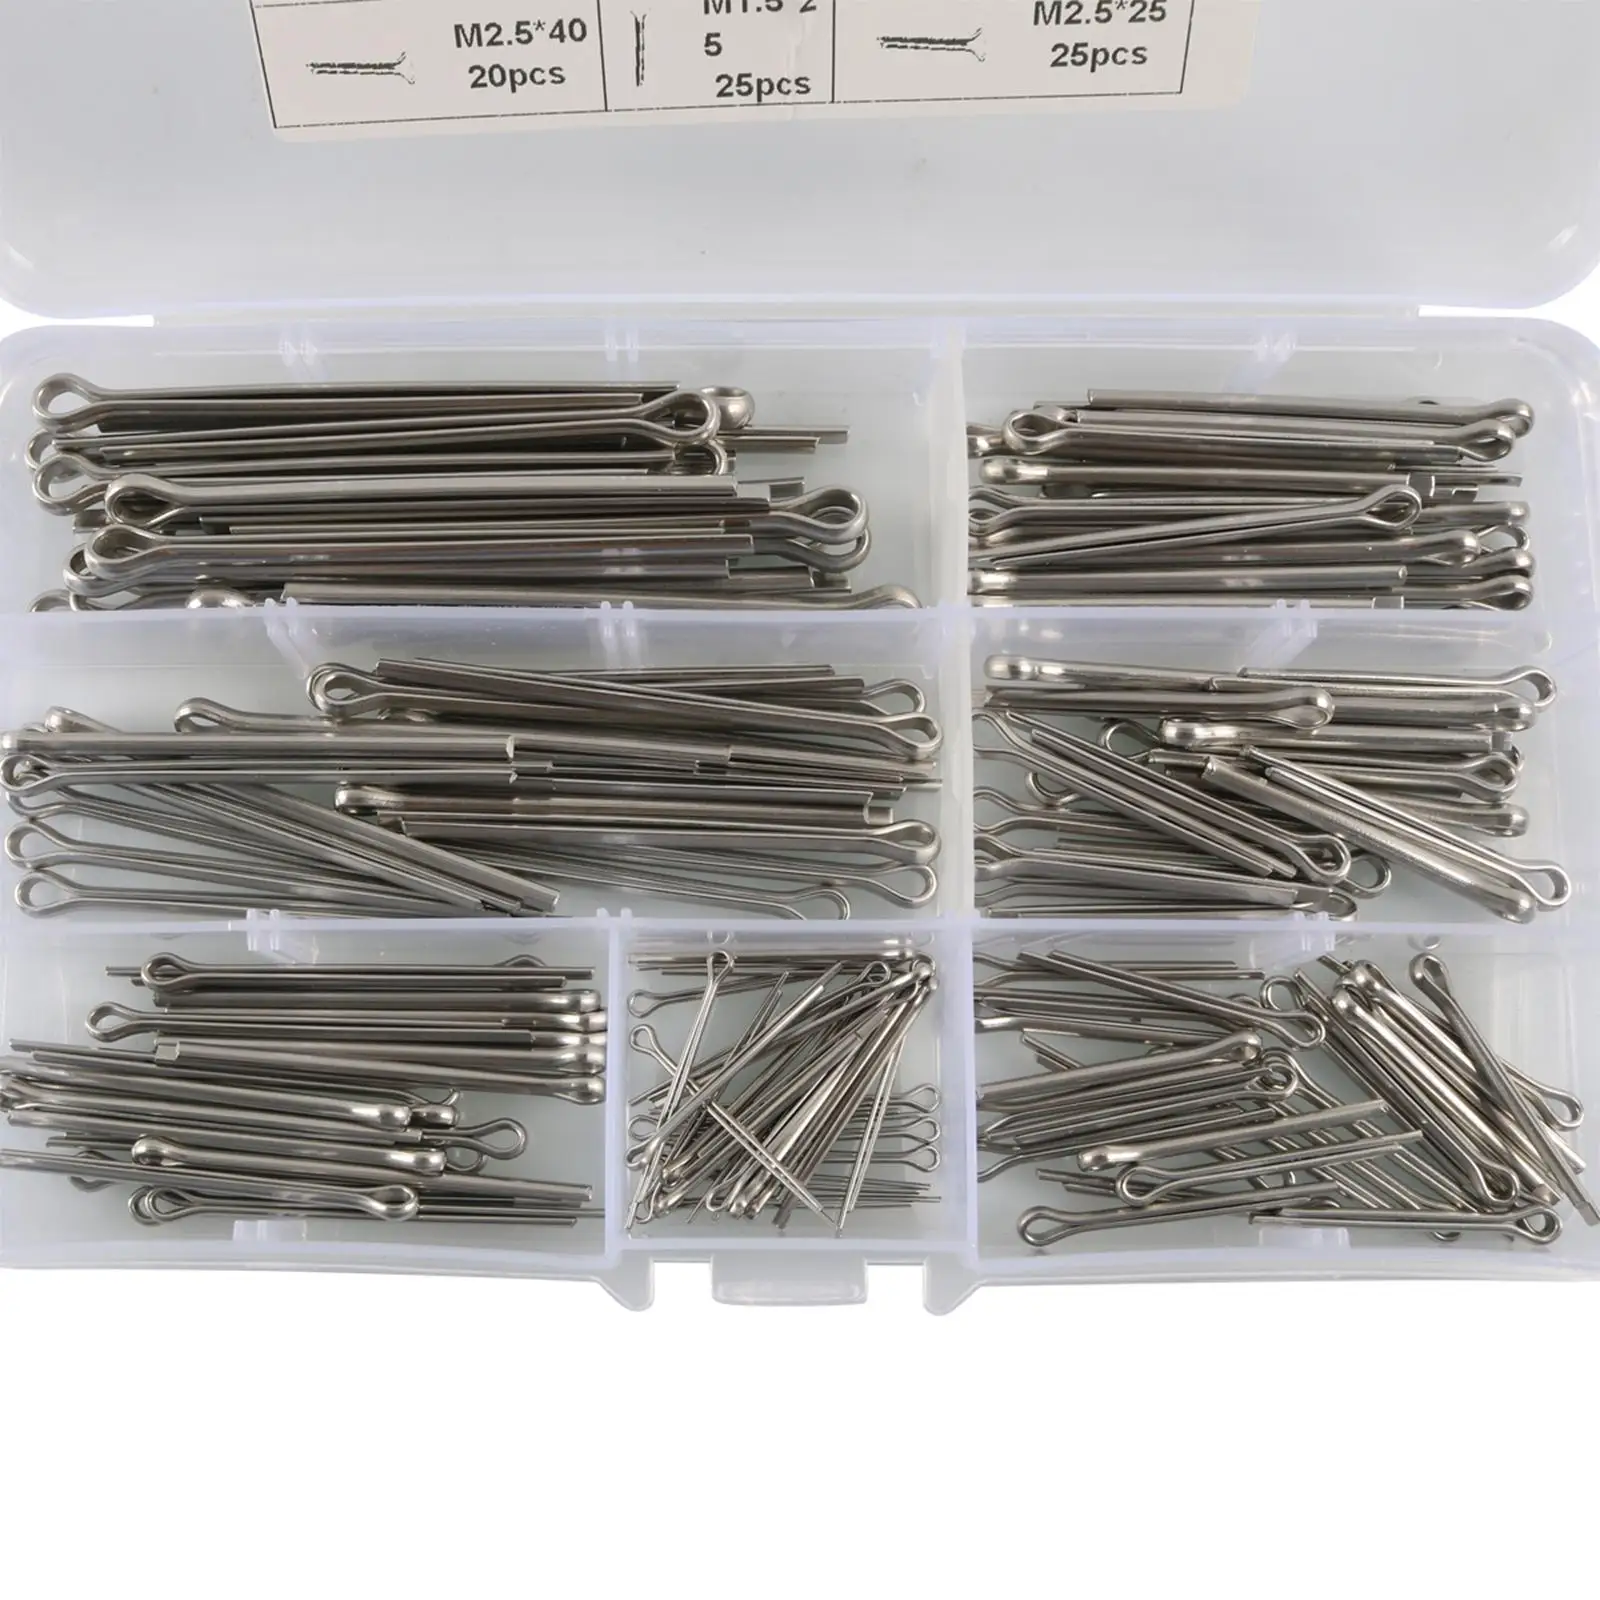 150x 7 Sizes Cotter Pin Clip Key Fastner Fitting Assortment Kit Straight Hairpins for Automotive Mechanics Car Garage Cars